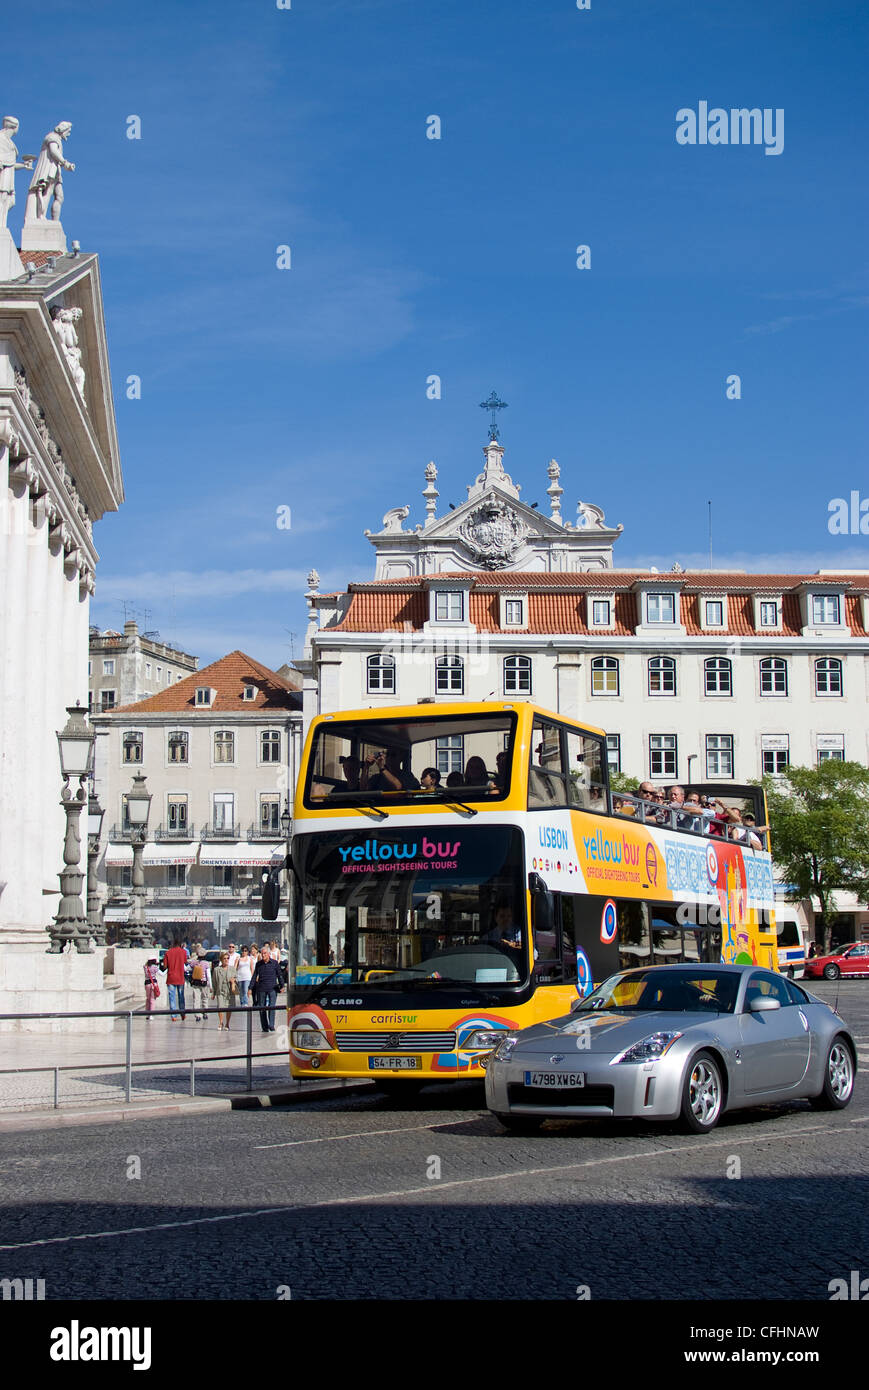 Lisbon Yellow Open Top Tourist Bus, going past National Theatre, Rossio Square, central Lisbon, Portugal, Europe Stock Photo